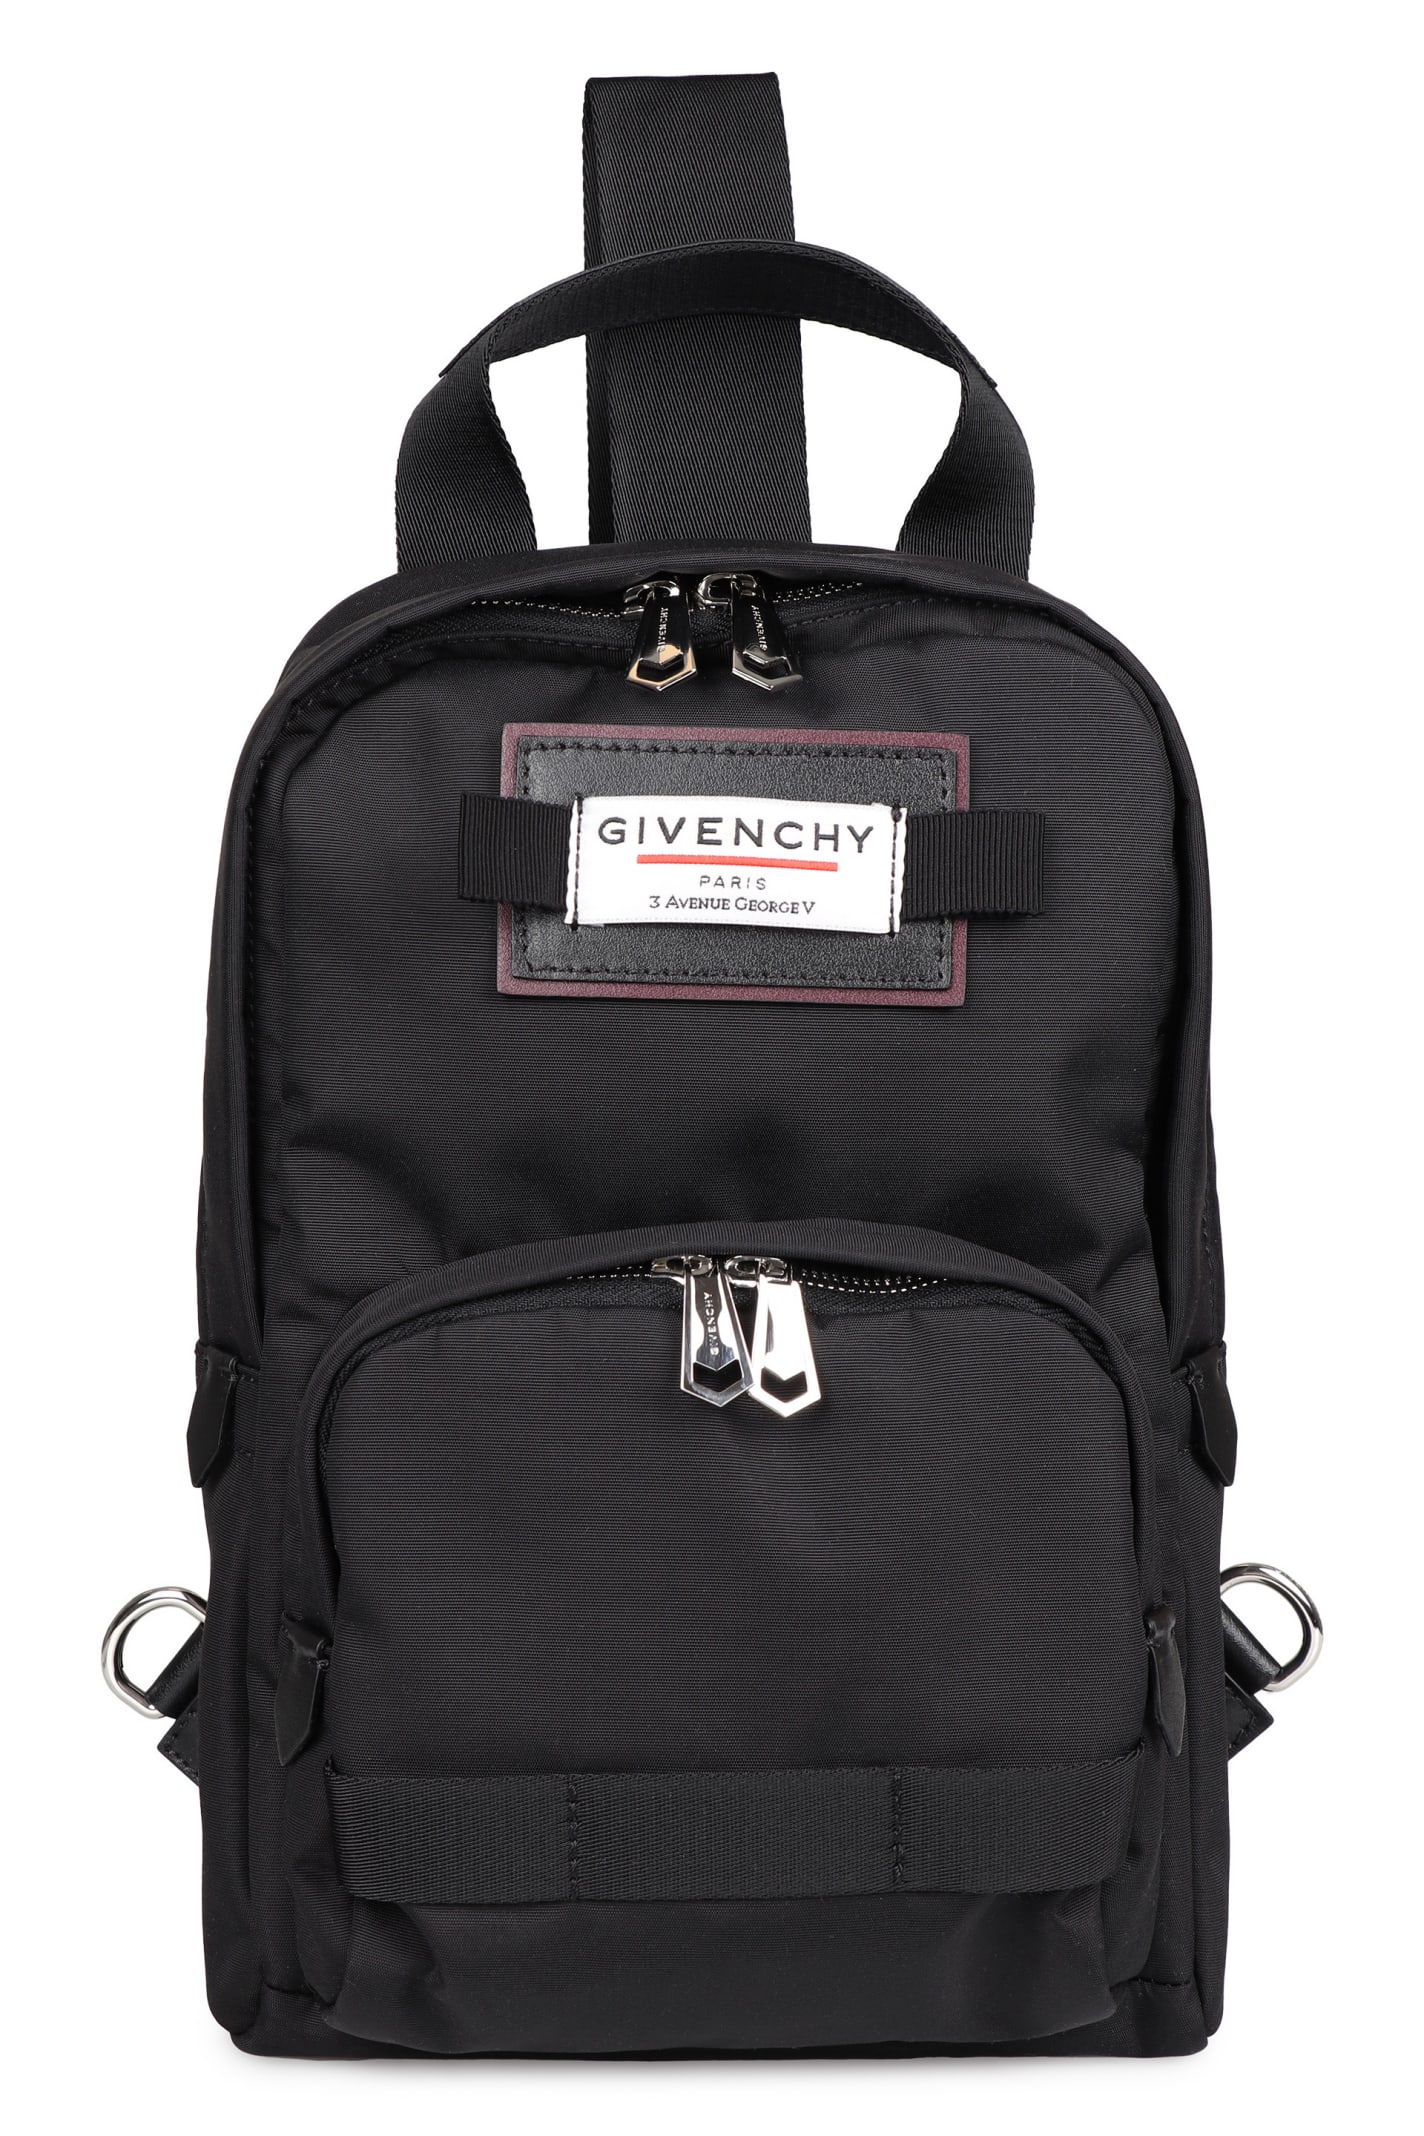 Givenchy Downtown Nylon One-shoulder Backpack